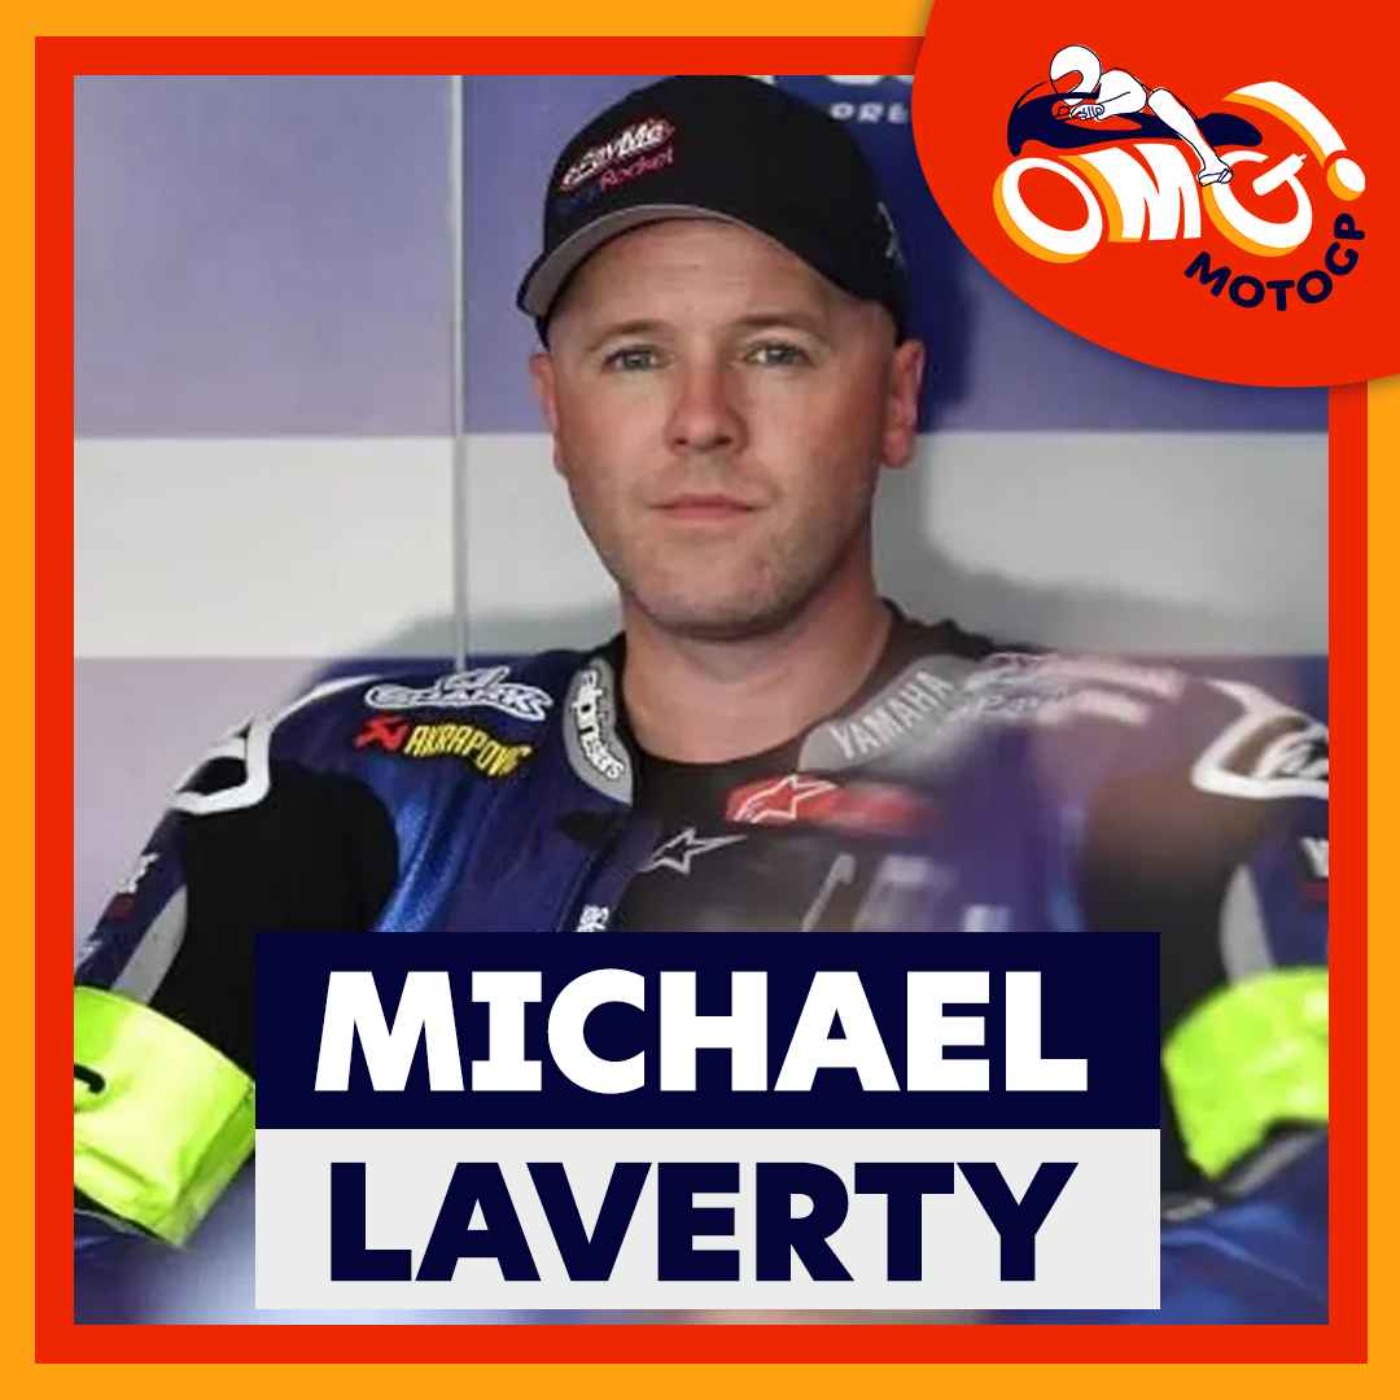 Michael Laverty on what the future holds for MotoGP